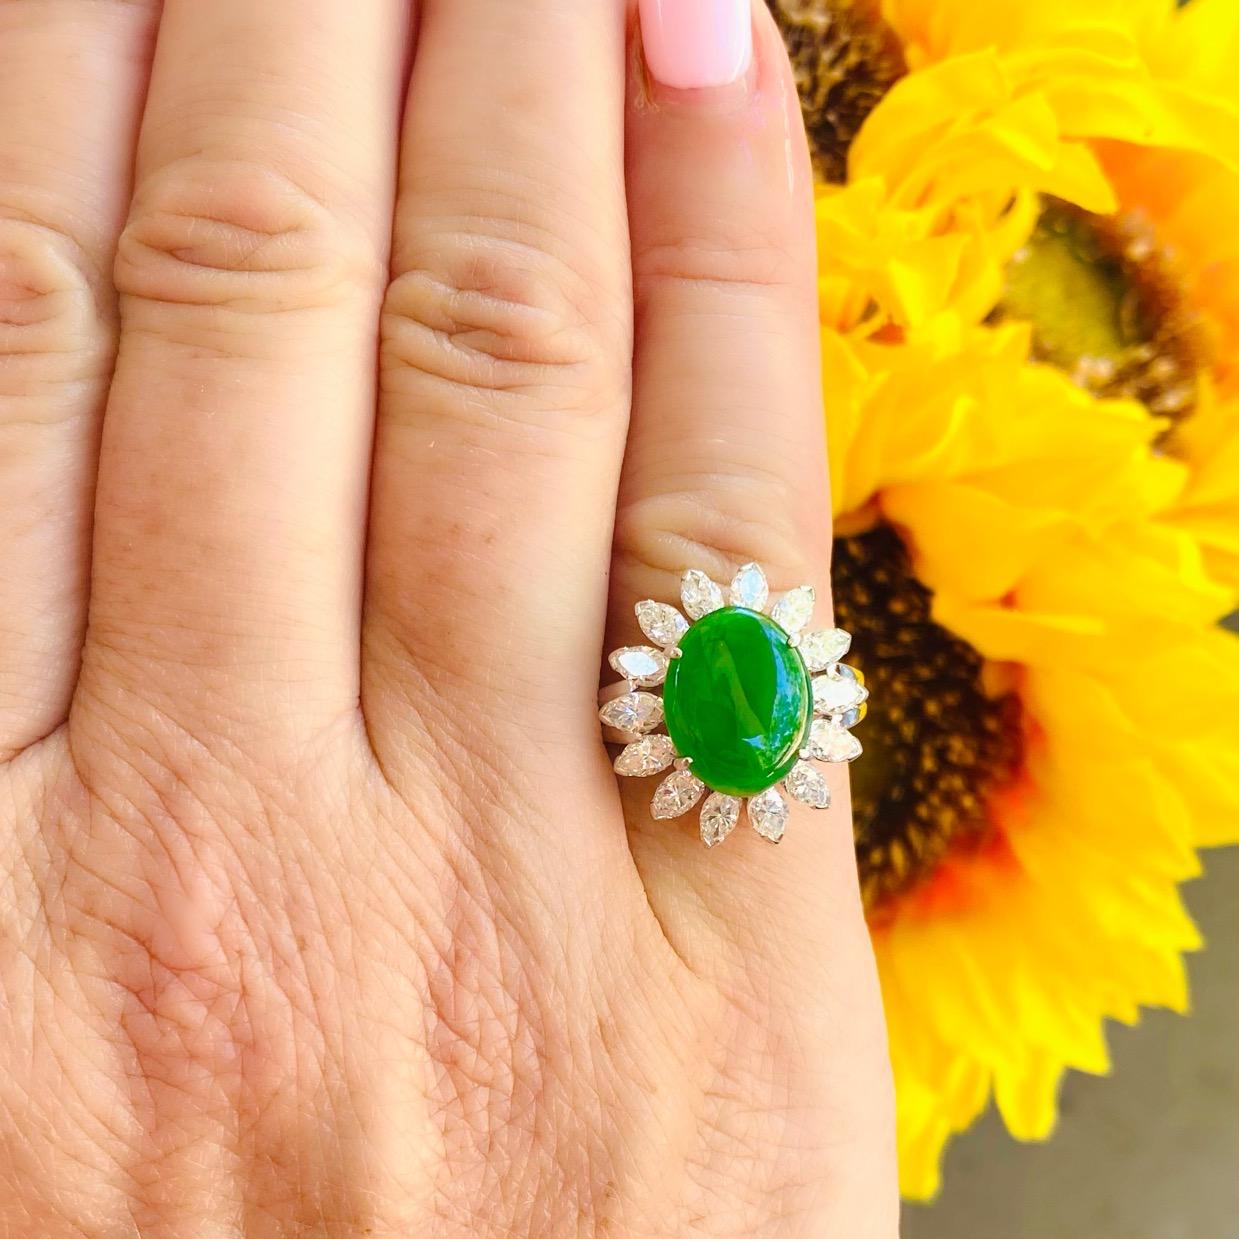 For the discriminating collector who appreciates and understands fine jade. This estate platinum ring centers on a gorgeous piece of fine oval jade graded by the Gemological Institute of America as Type A Natural Jadeite Jade with no indications of